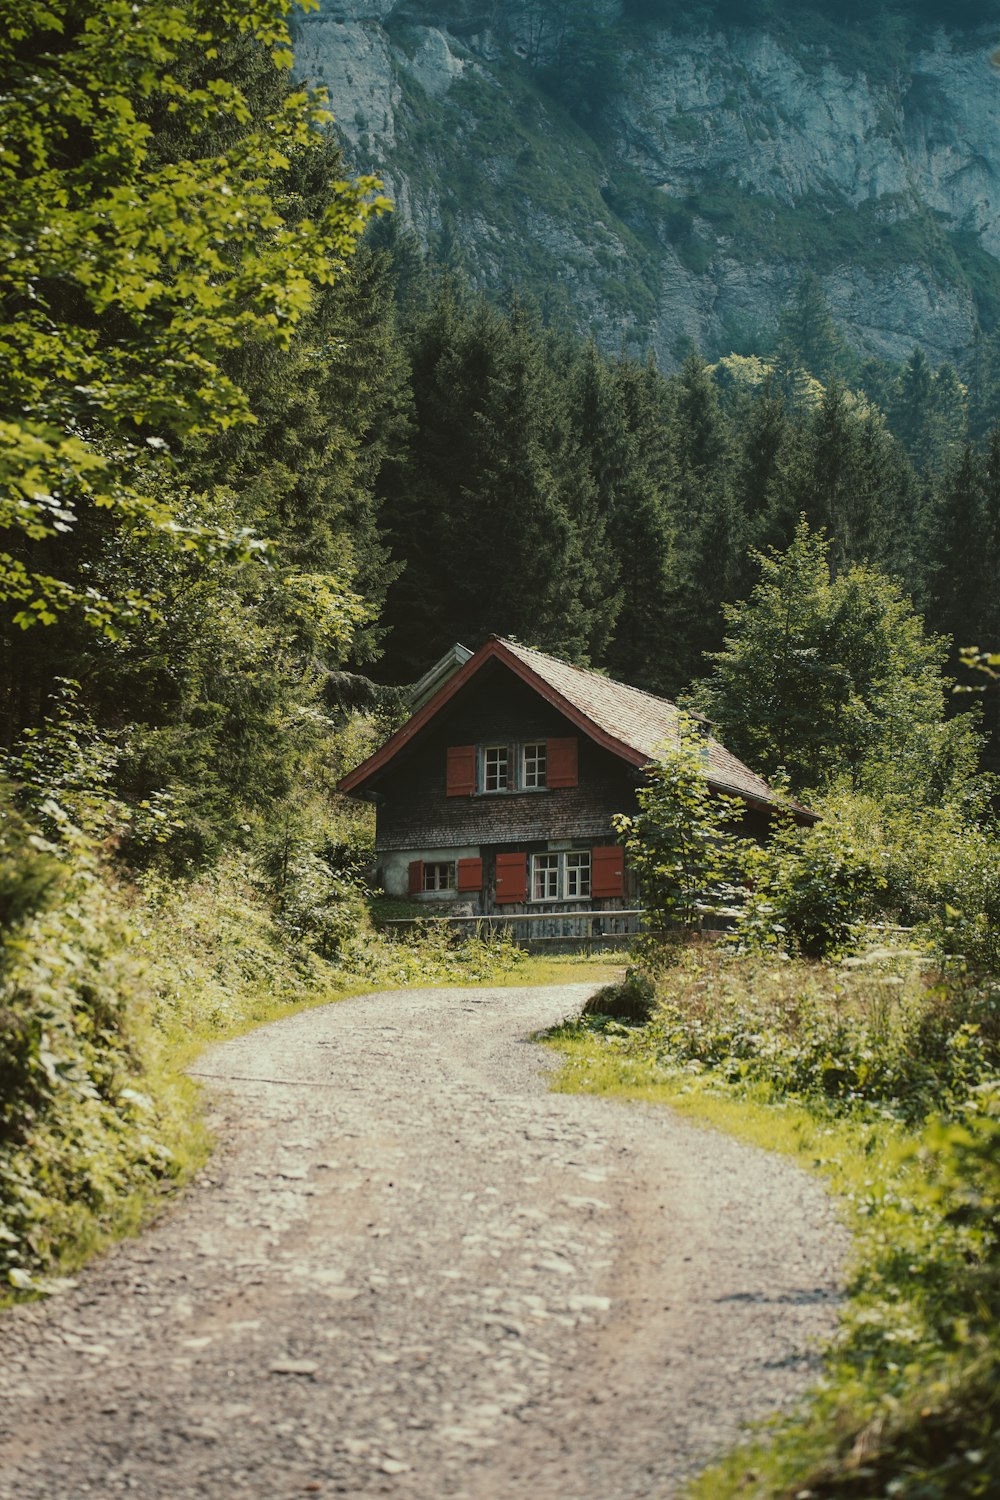 a house on a dirt road in the mountains